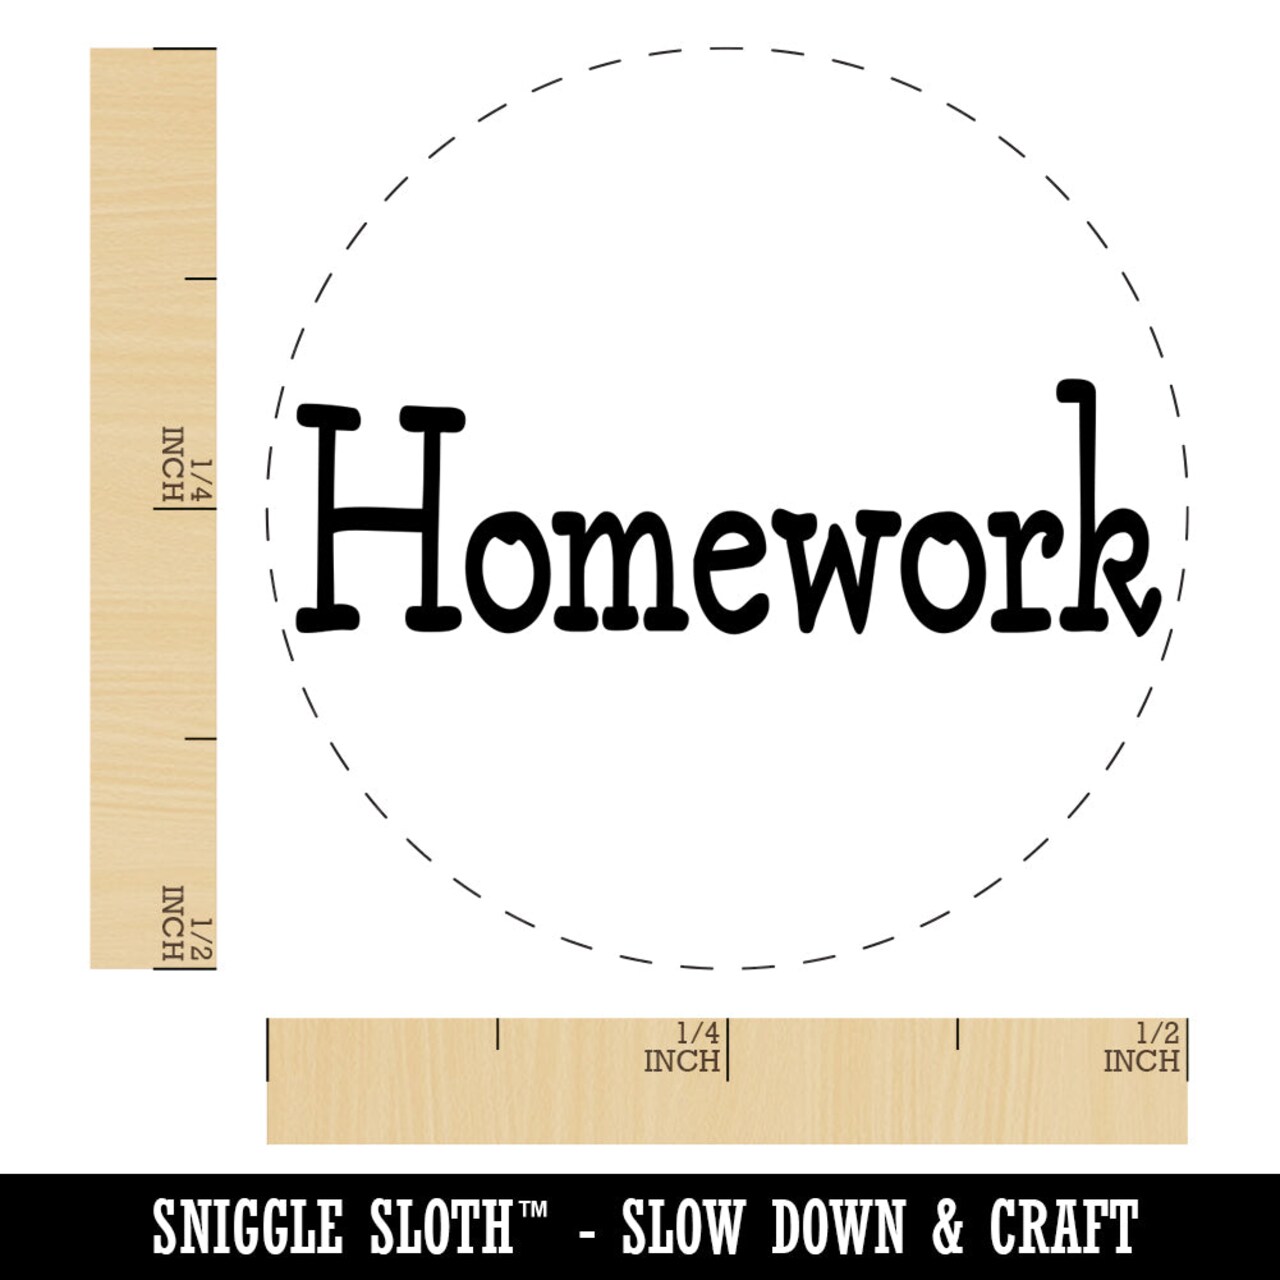 Homework Fun Text Self-Inking Rubber Stamp for Stamping Crafting Planners